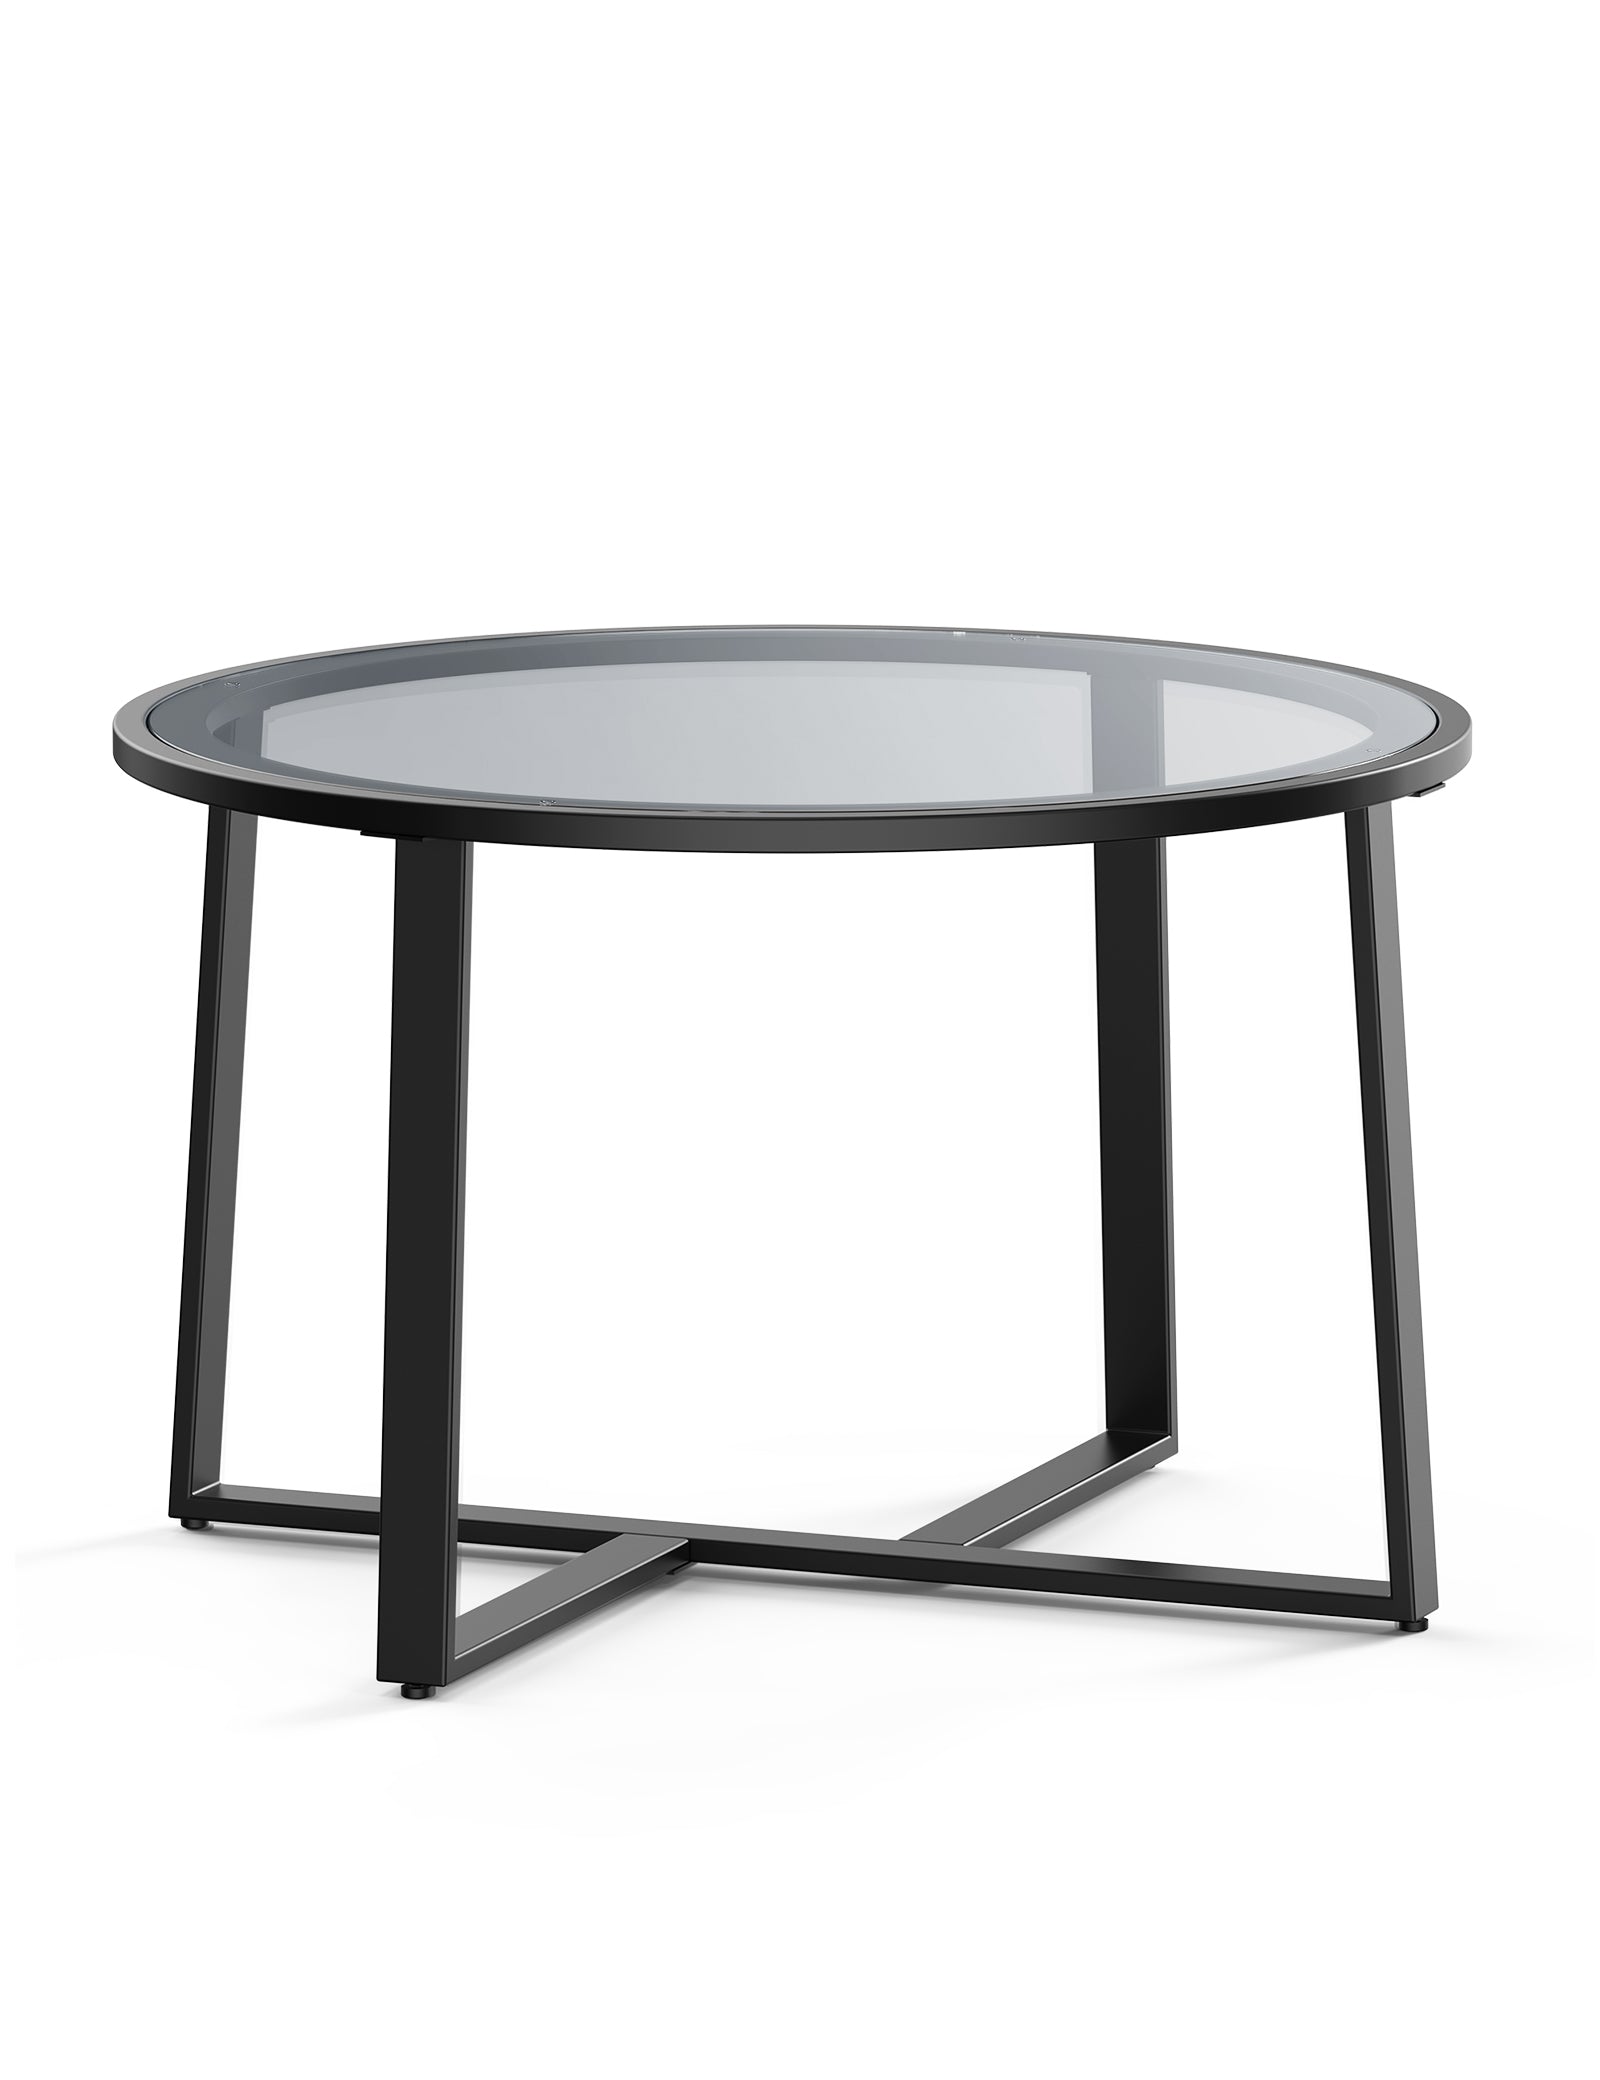 Evajoy LRF001 Coffee Table, 27.6" Alloy Steel Round Coffee Table with Tempered Glass Surface